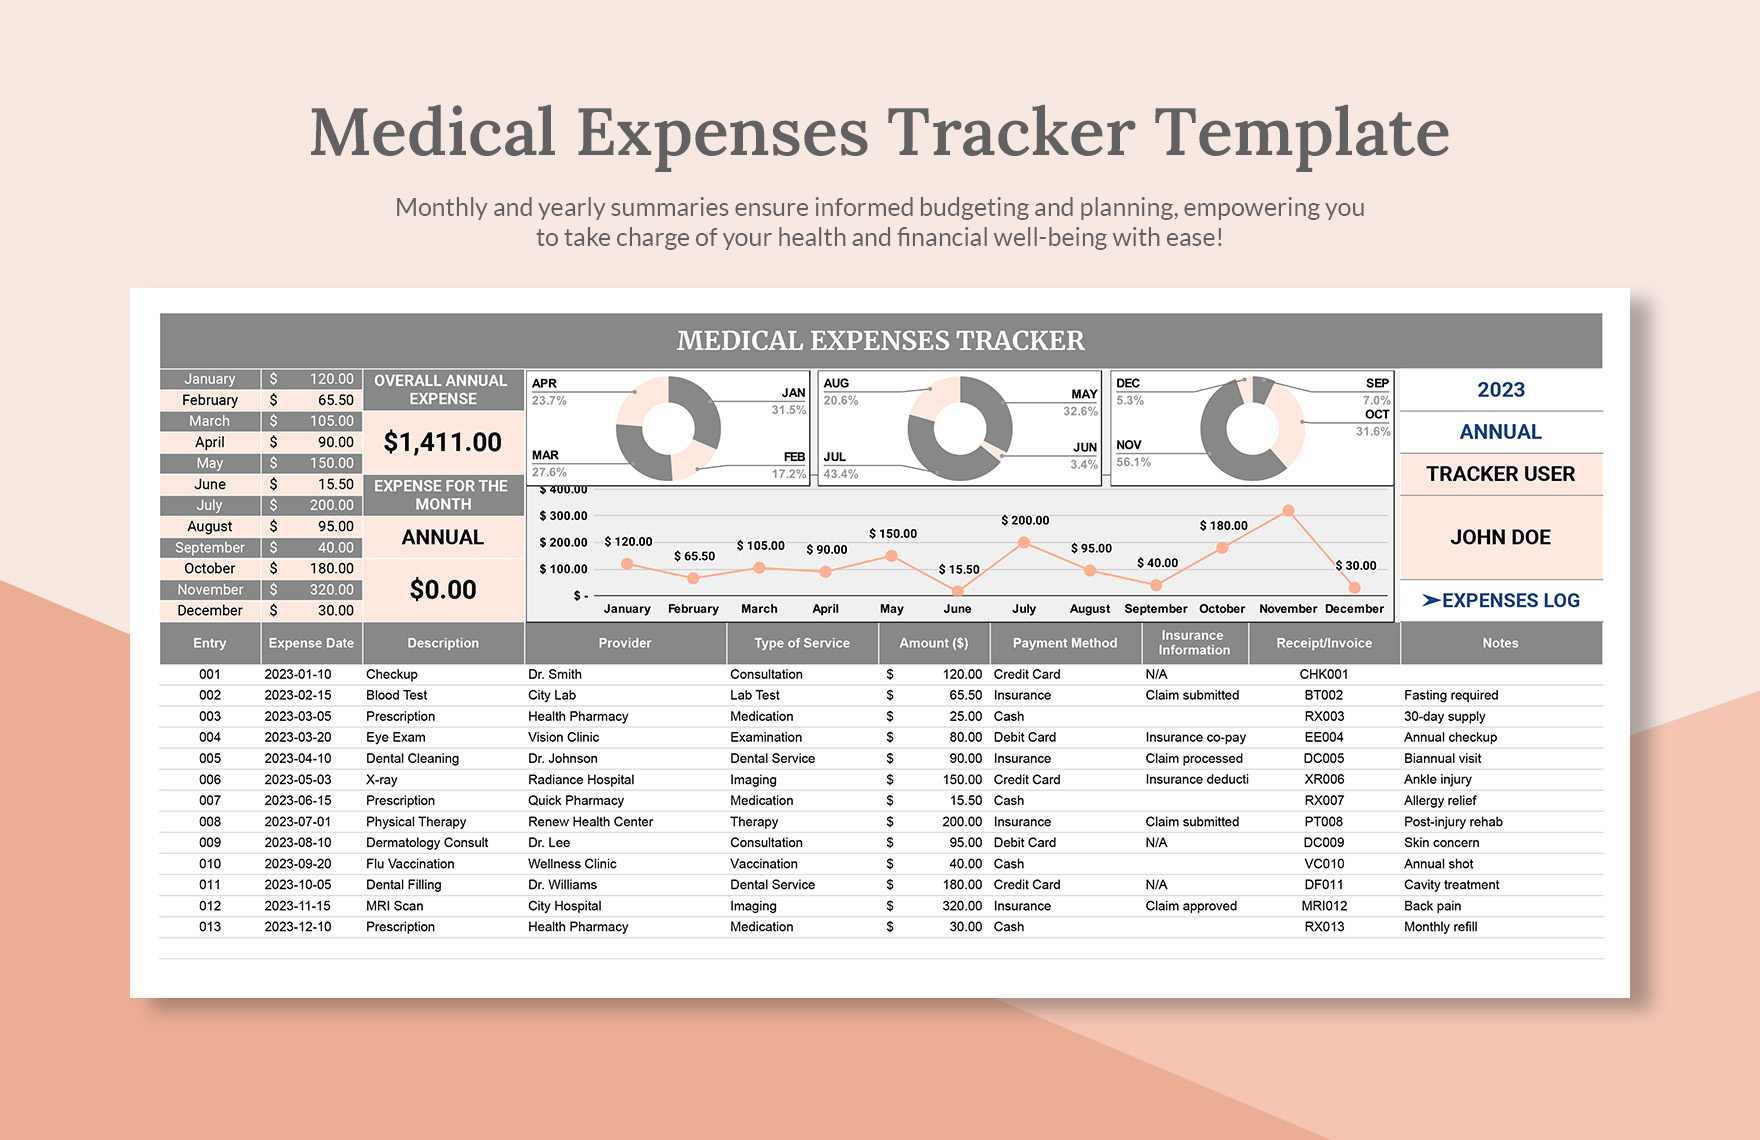 Medical Expenses Tracker Template